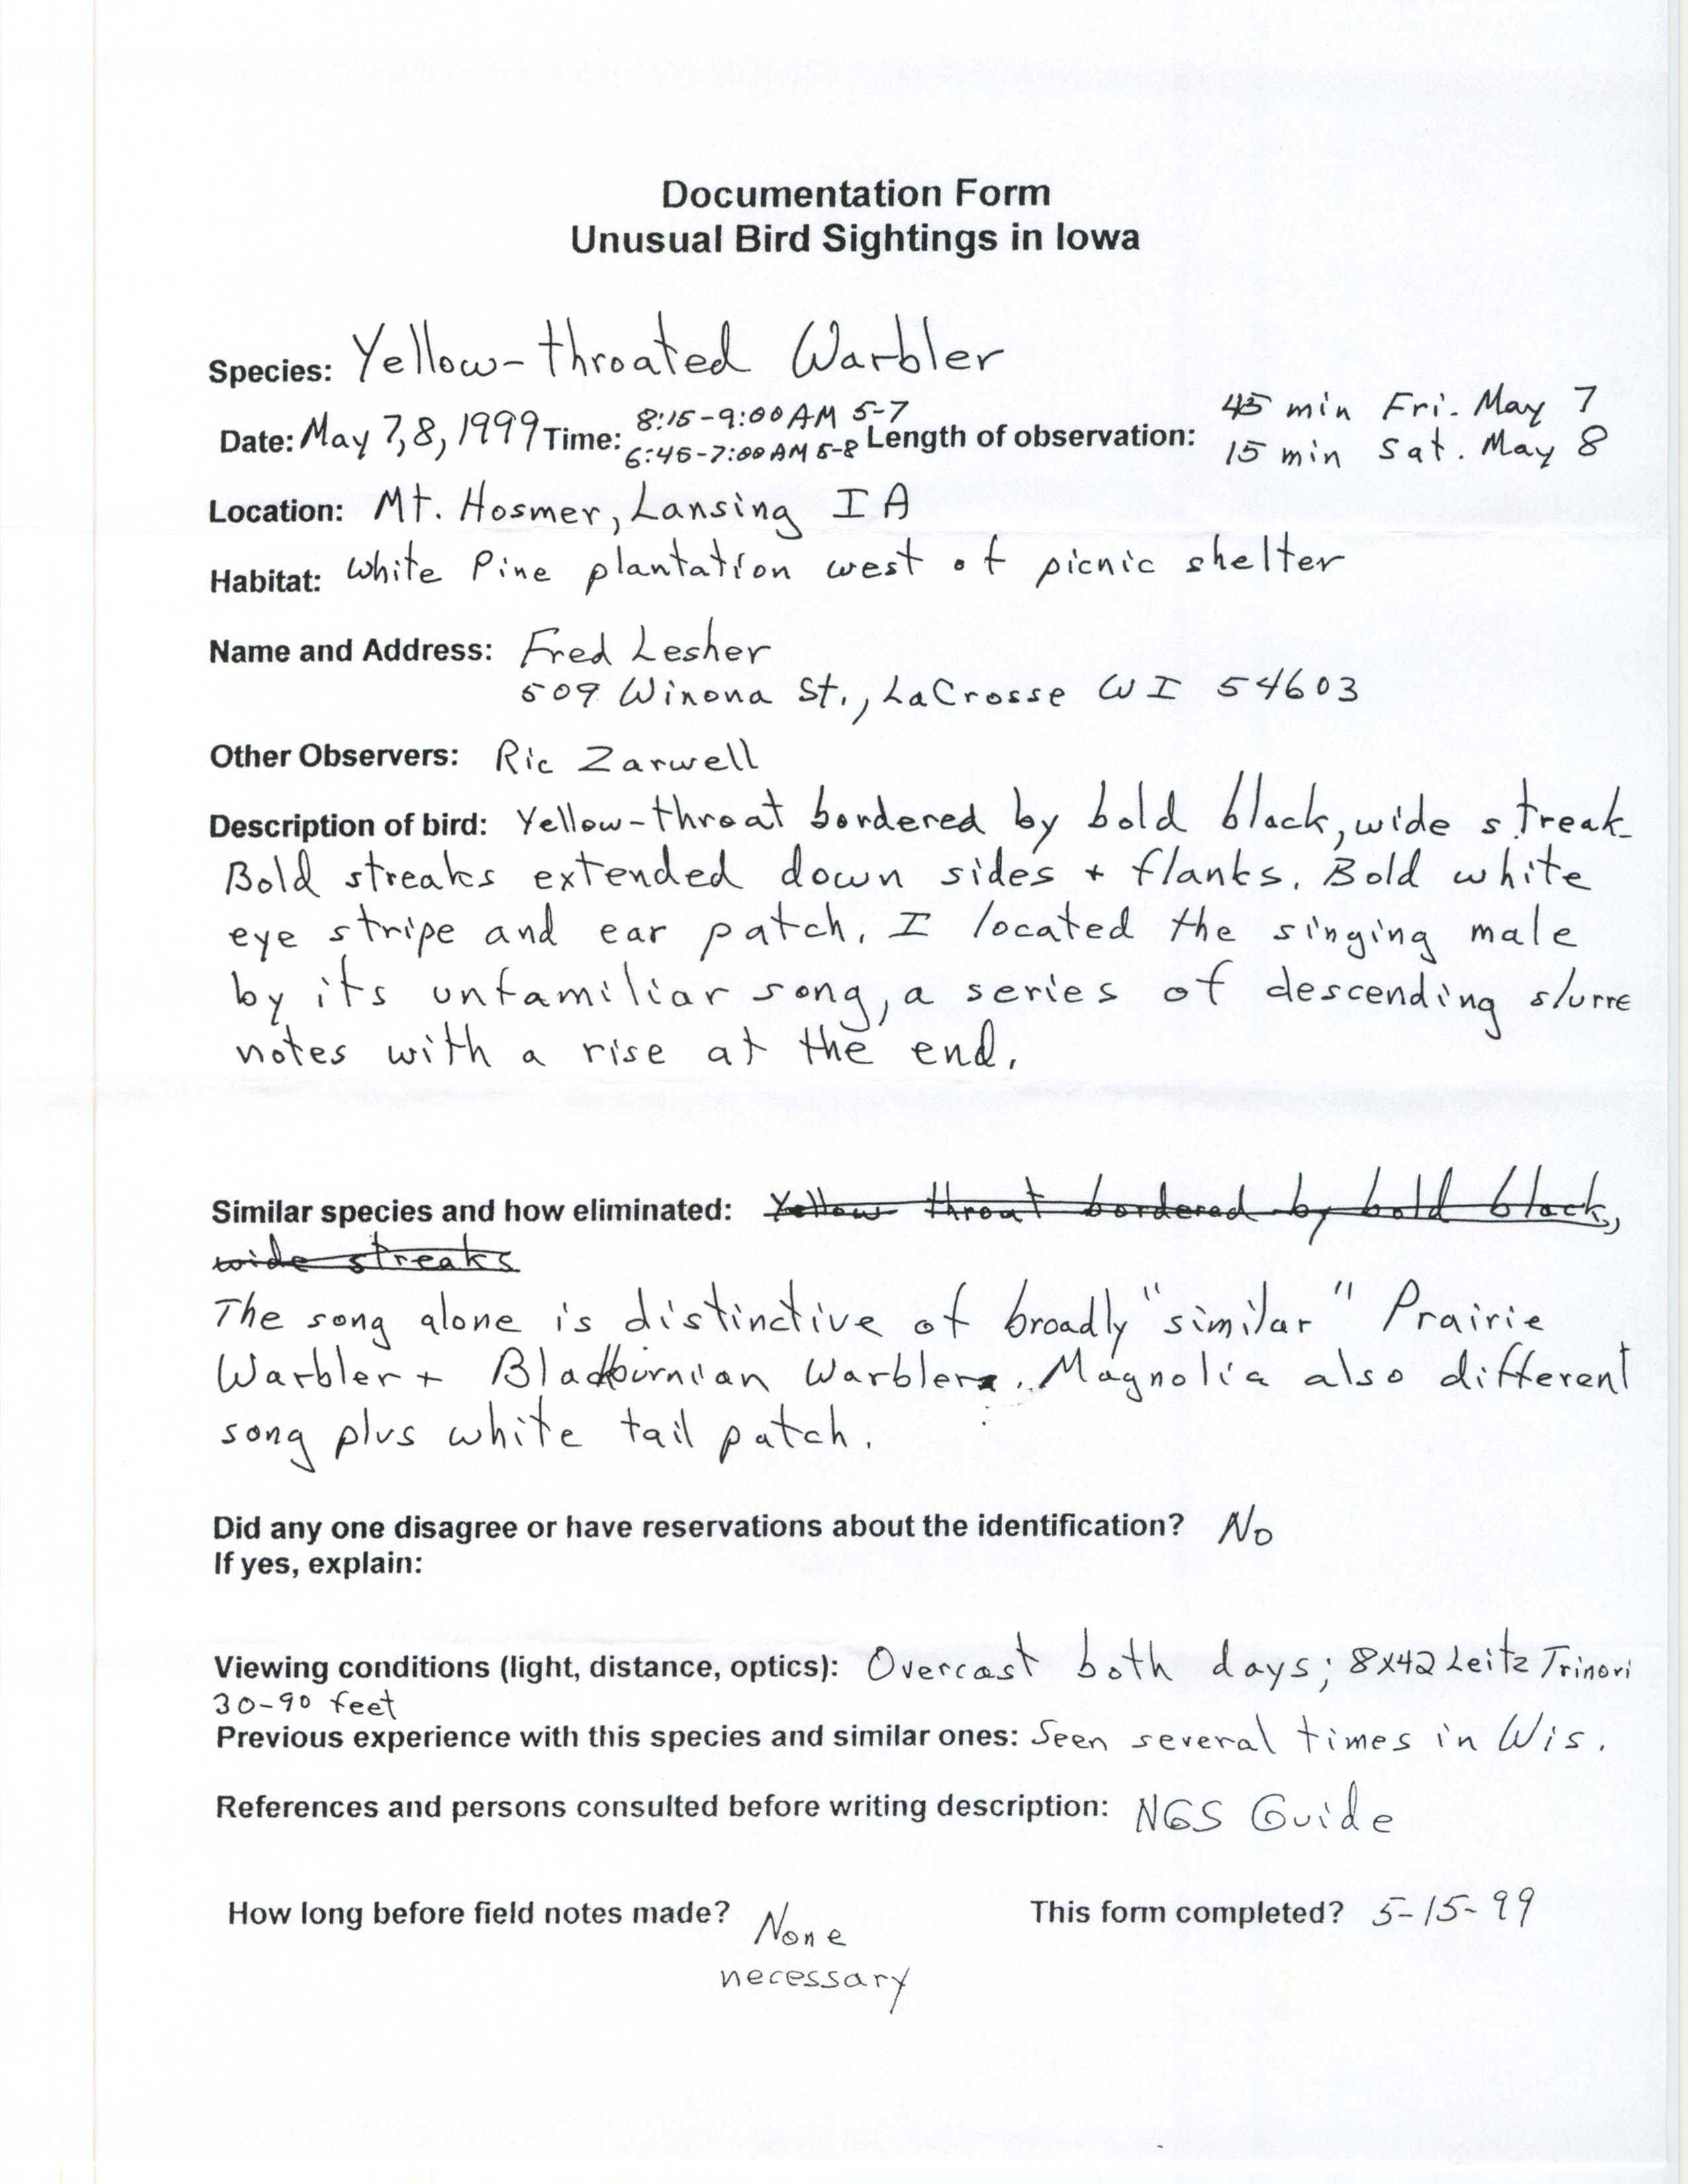 Rare bird documentation form for Yellow-throated Warbler at Mount Hosmer Park in Lansing in 1999